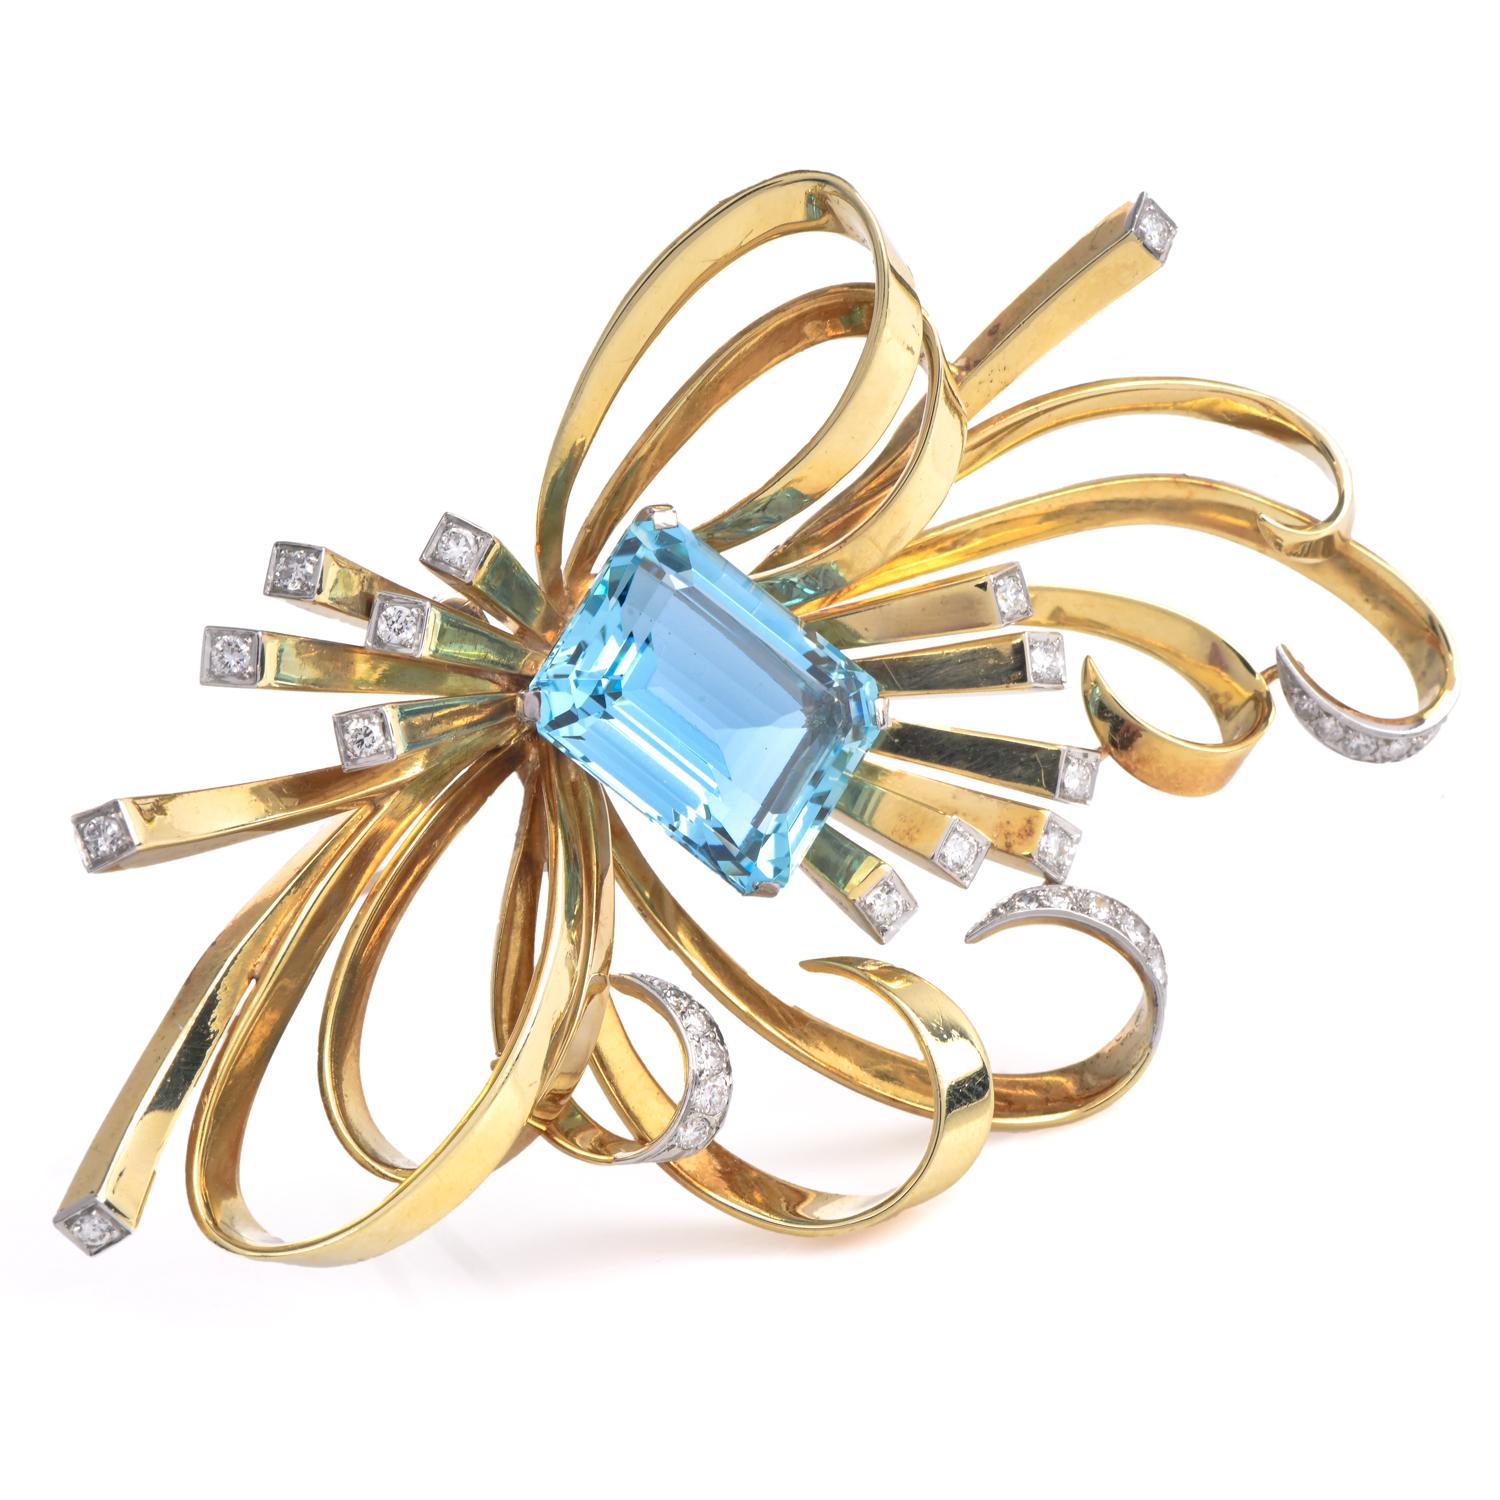 Stunning Retro 1950S Vinatge 18K Yellow Gold Ribbon Brooch with Starburst Strokes decorated with Natural Diamonds centered with a GIA-certified genuine Ocean Blue Aquamarine weighing approx. 19.01 carats. The Diamonds are brilliant round prongs set